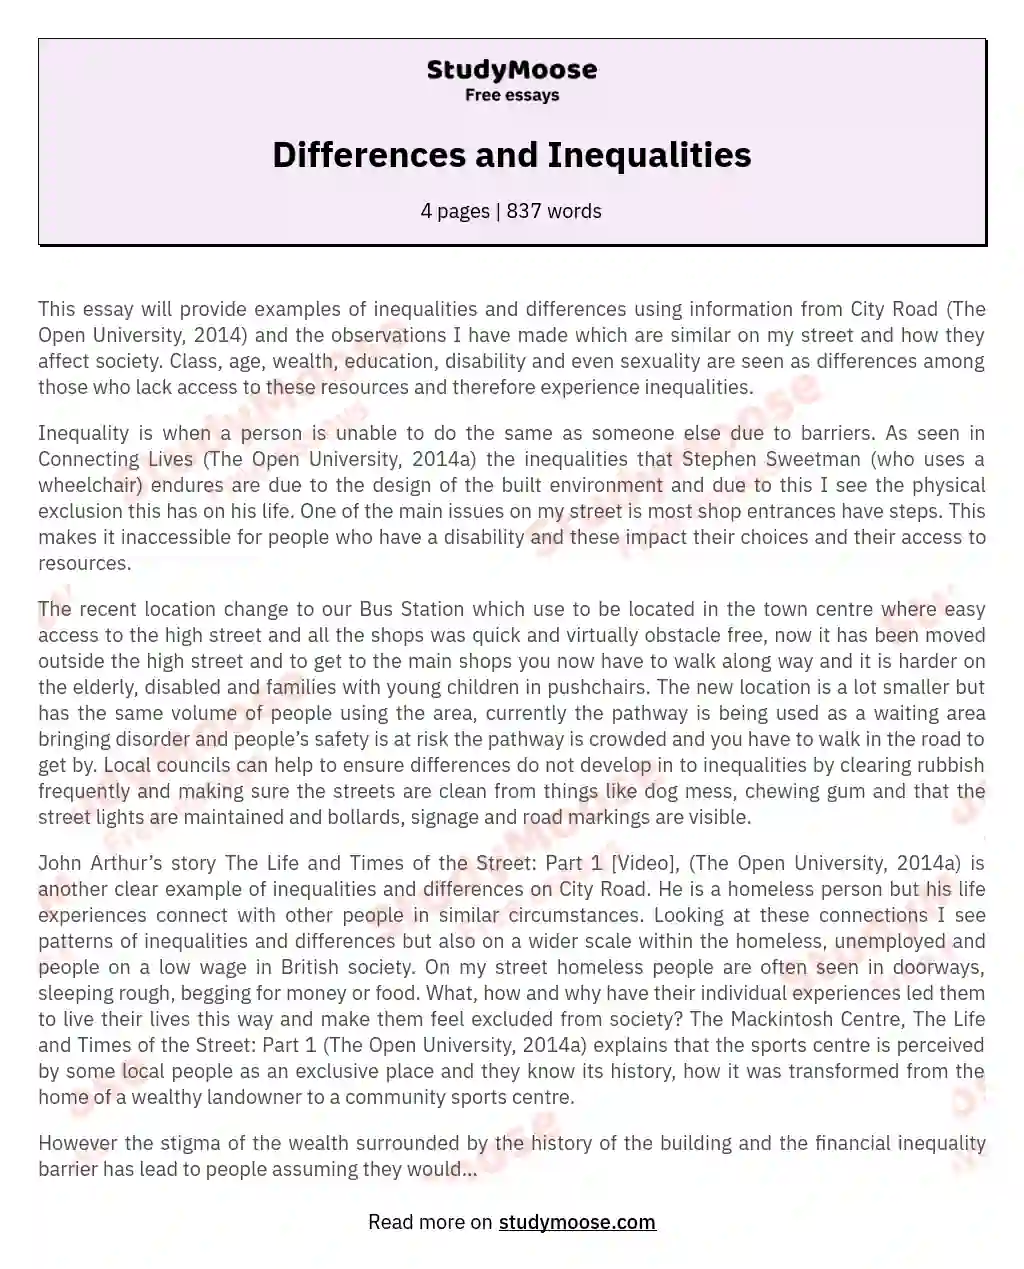 Differences and Inequalities essay